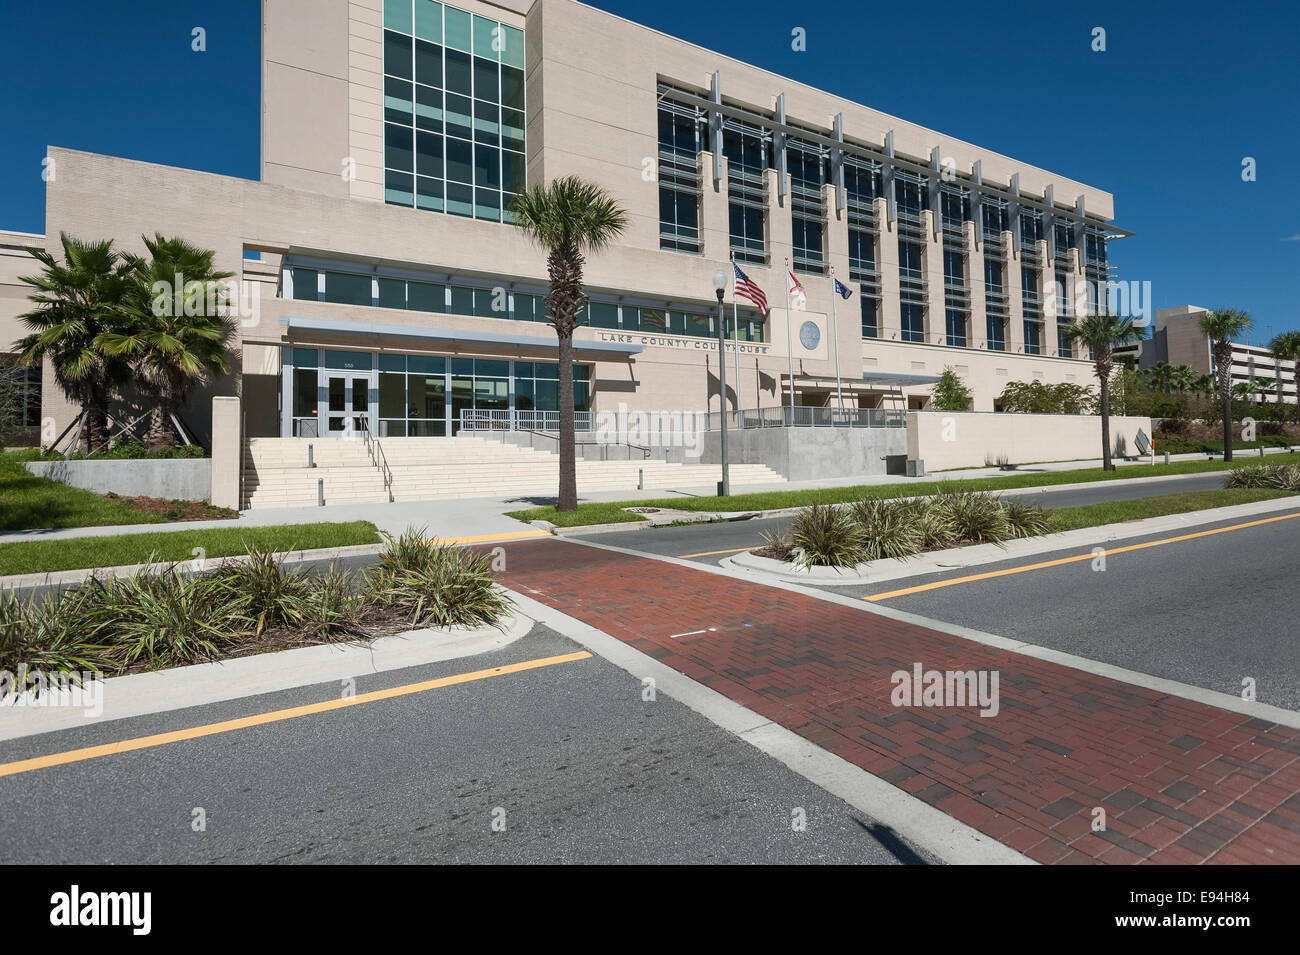 Lake County Courthouse located in Tavares, Florida United States Stock Photo